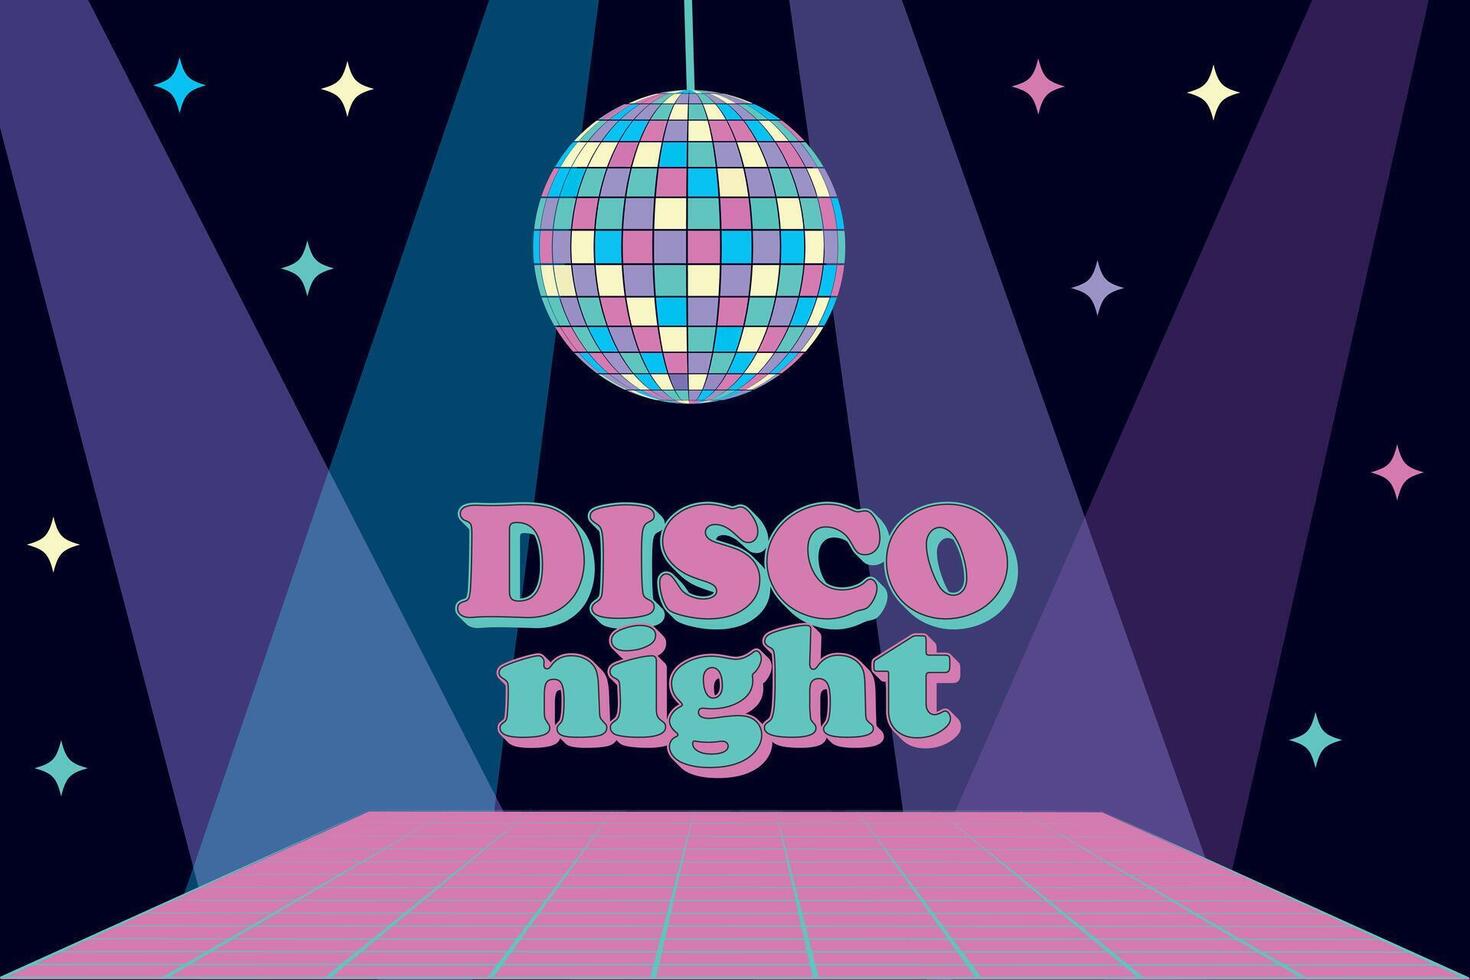 Retro Disco party vector background with spotlights and disco ball. Futuristic illustration in 1990s posters style. Retro Nostalgic vaporwave cyberpunk artwork with vibrant neon colors